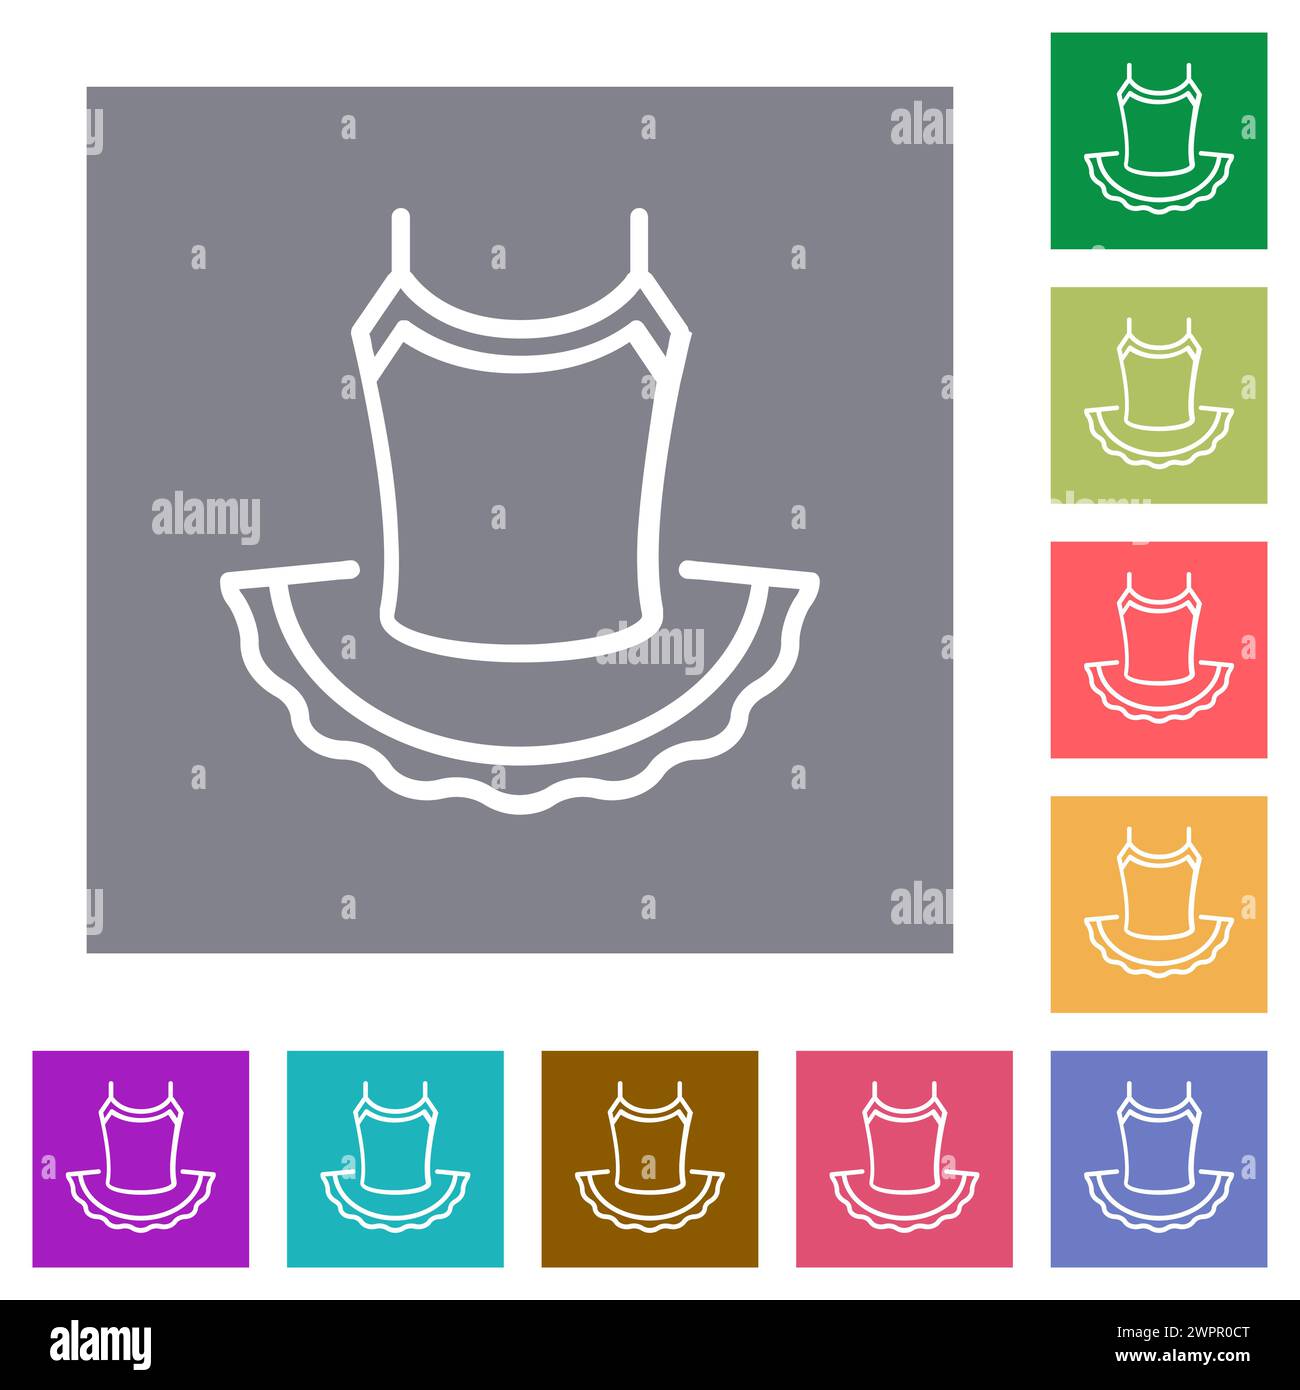 Ballet dress outline flat icons on simple color square backgrounds Stock Vector